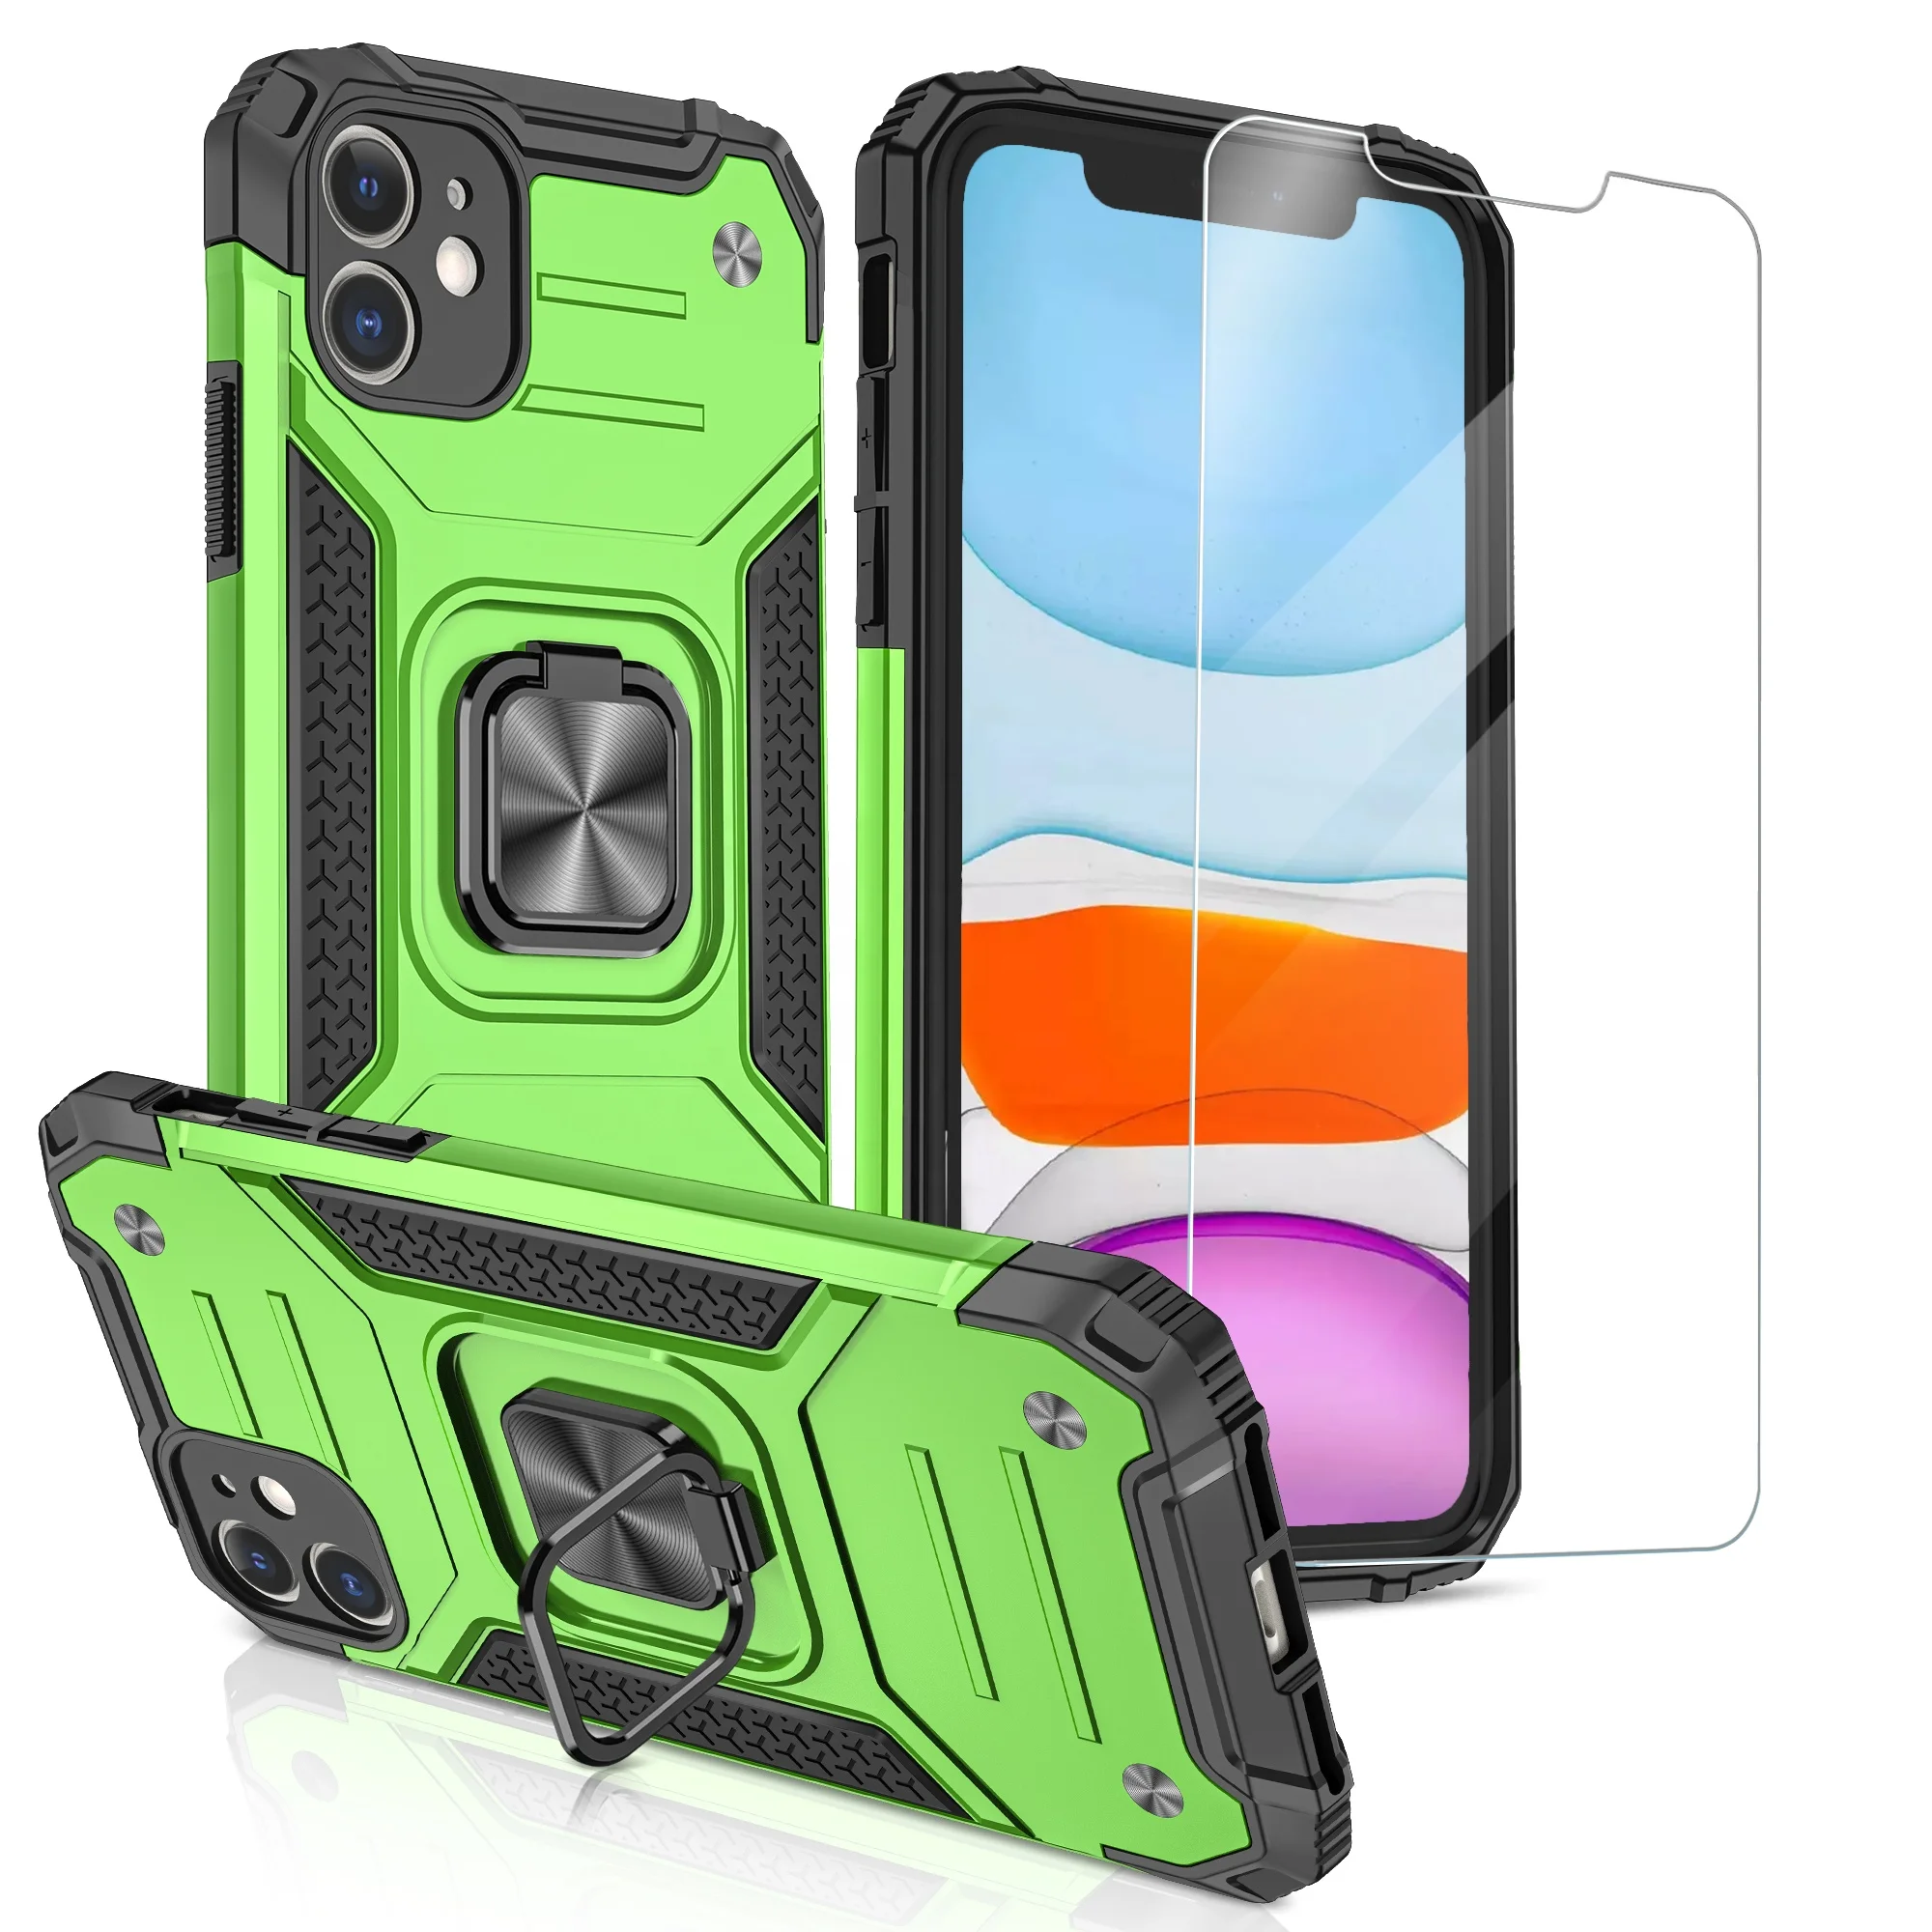 

New Arrivals 360 Kickstand Case with Tempered Glass Mobile Phone Case for iPhone 12/11/Xs Max/Xr/X/8P/7P Hard Back Cover, Multi colors